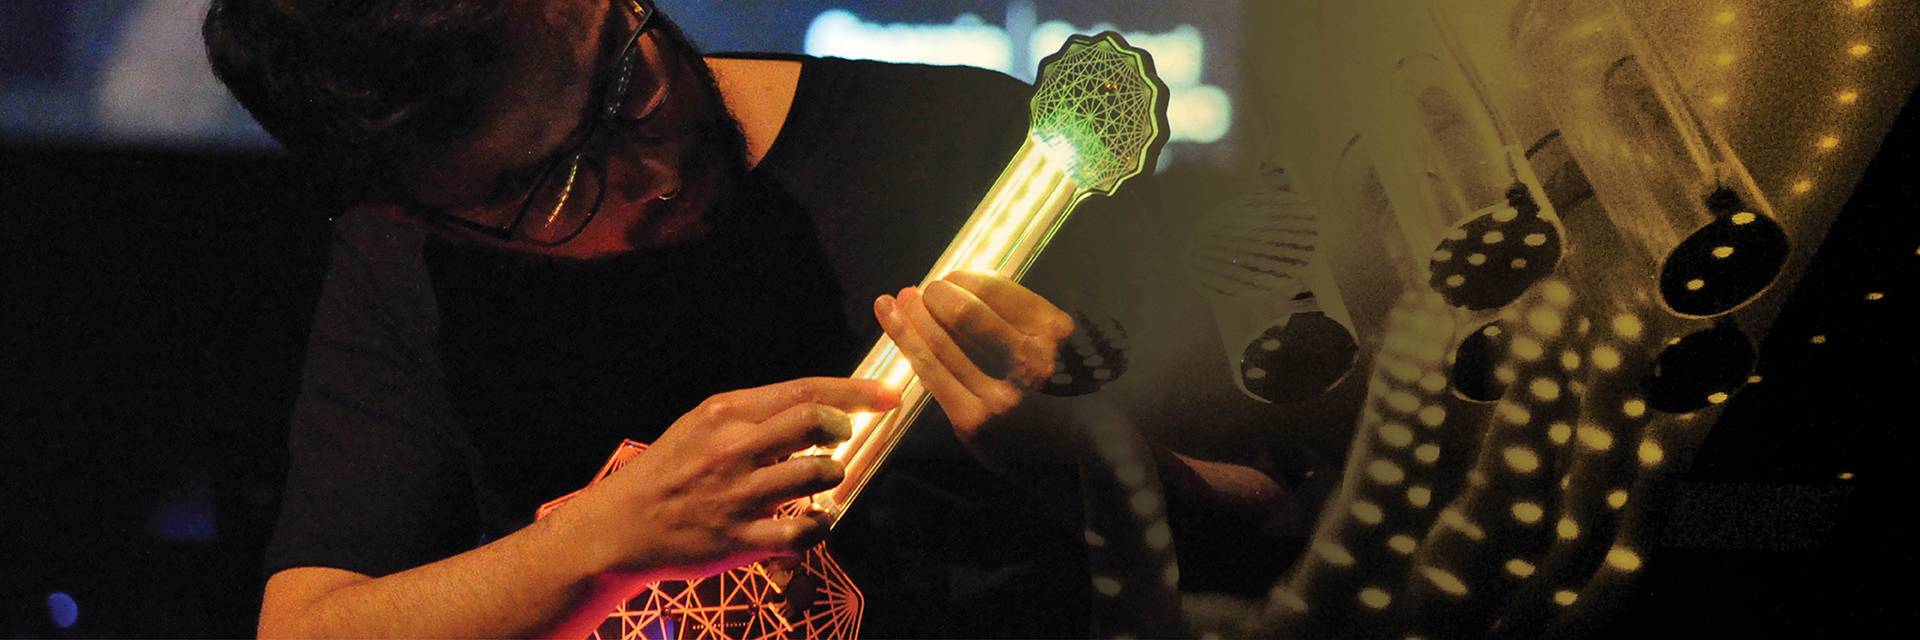 A Guthman contestant plays a guitar-like instrument with LED lights.